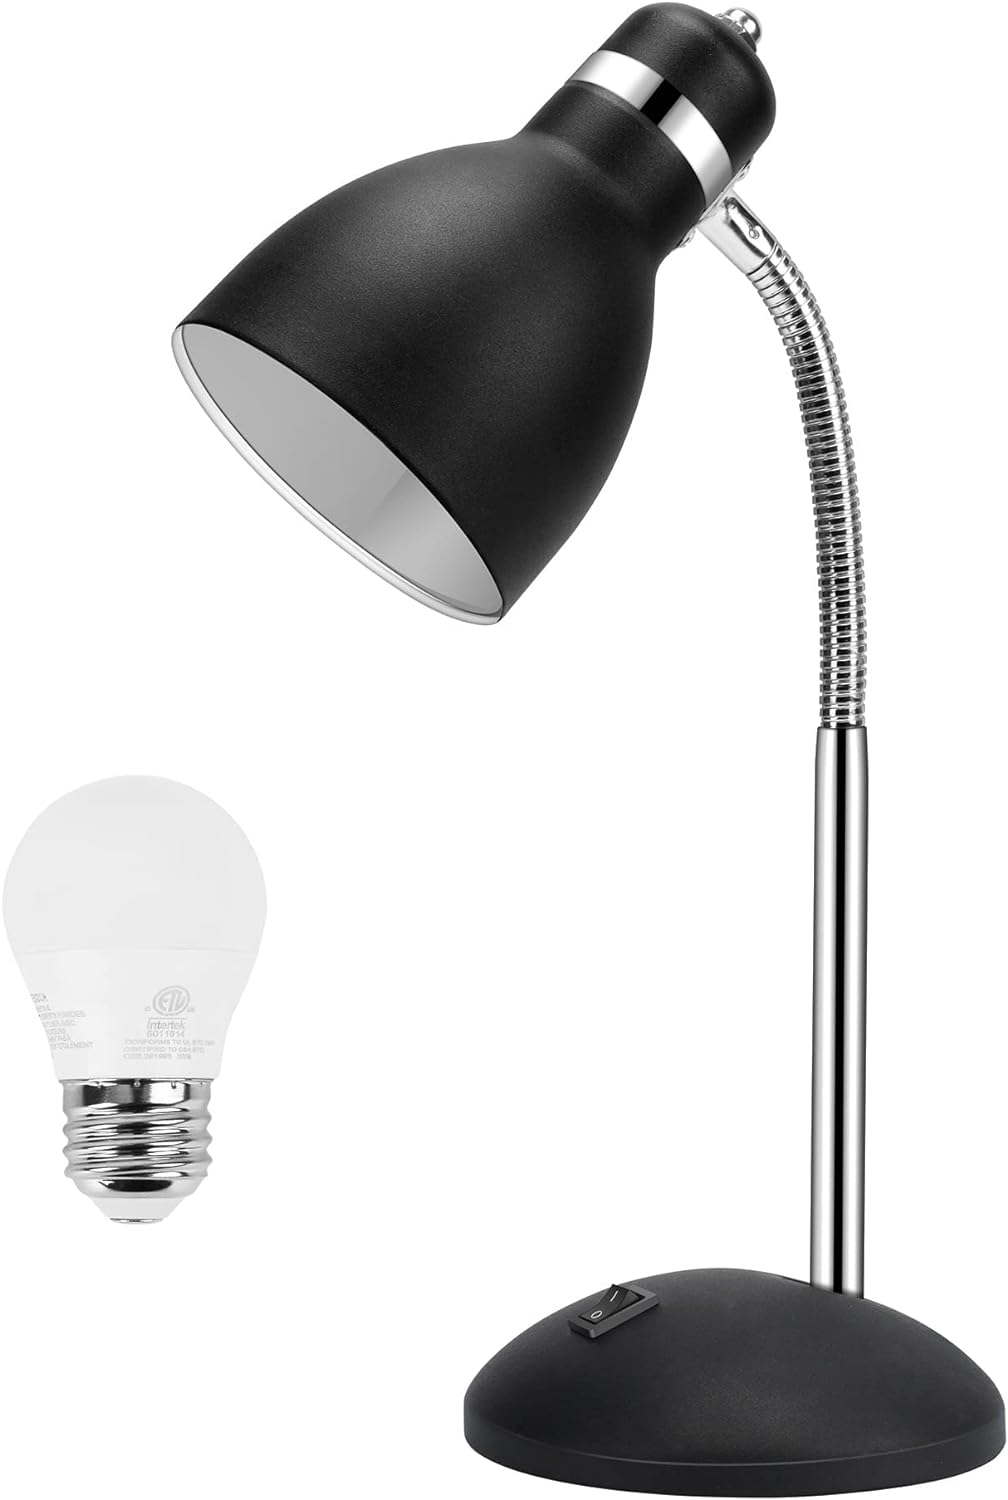 Very stable - base is a good weight. Head is large enough to cover the end of the bulb, unlike many others. Flexible neck is firm enough to hold the head in any usable position. Switch seems solid and durable. Black paint is nice matte dull color. With LED bulb, shade doesn't overhead so it is not too hot to adjust by hand. Great price for a very functional and good looking desk lamp. I've been using it for about a month with no issues.